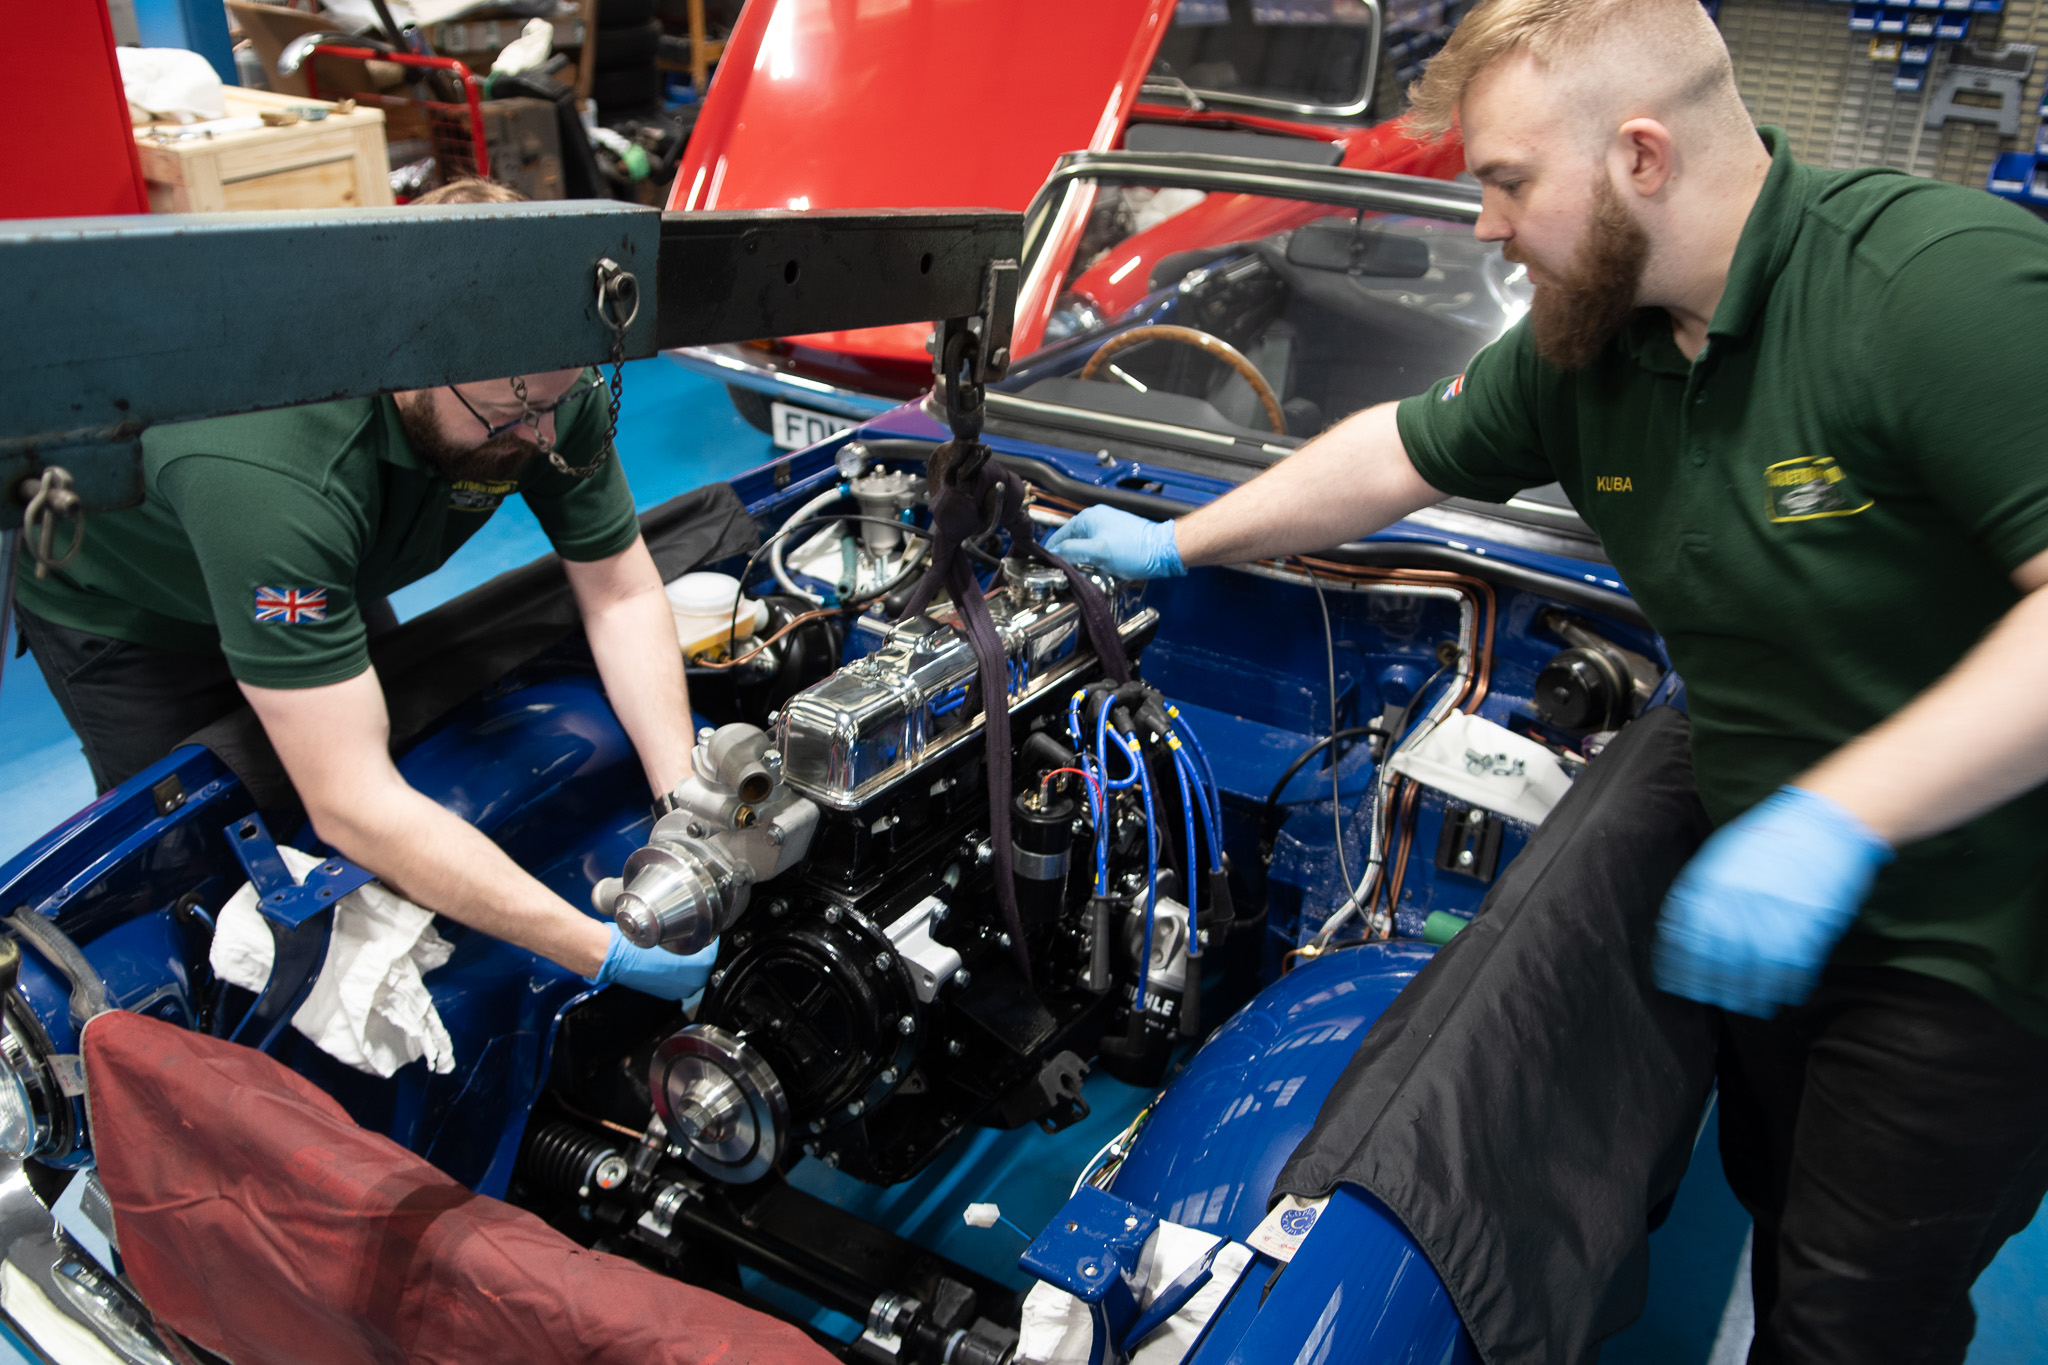 Two mechanics work on installing a car engine. They are in a well-equipped workshop with various tools and parts visible in the background. The car is a blue classic model with the hood open and radiator cover removed. Both mechanics wear uniforms and blue gloves.